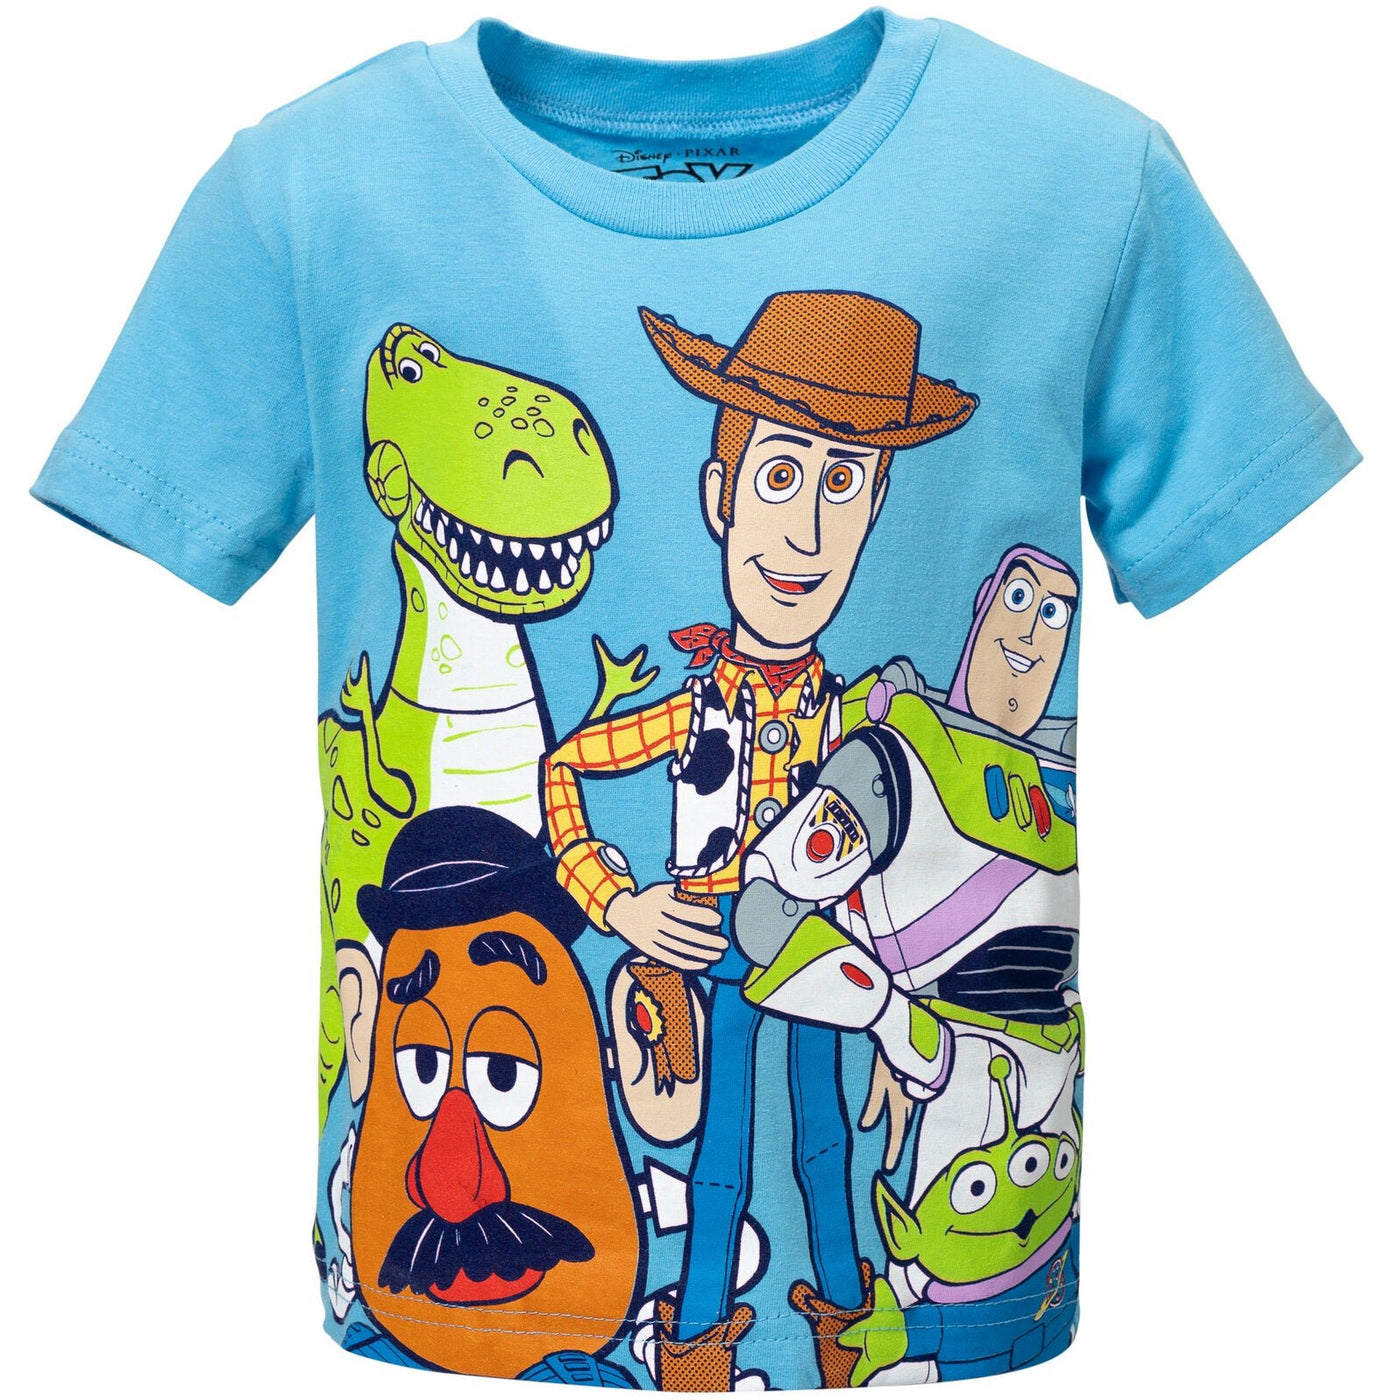 Disney Pixar Toy Story T-Shirt and French Terry Shorts Outfit Set - imagikids